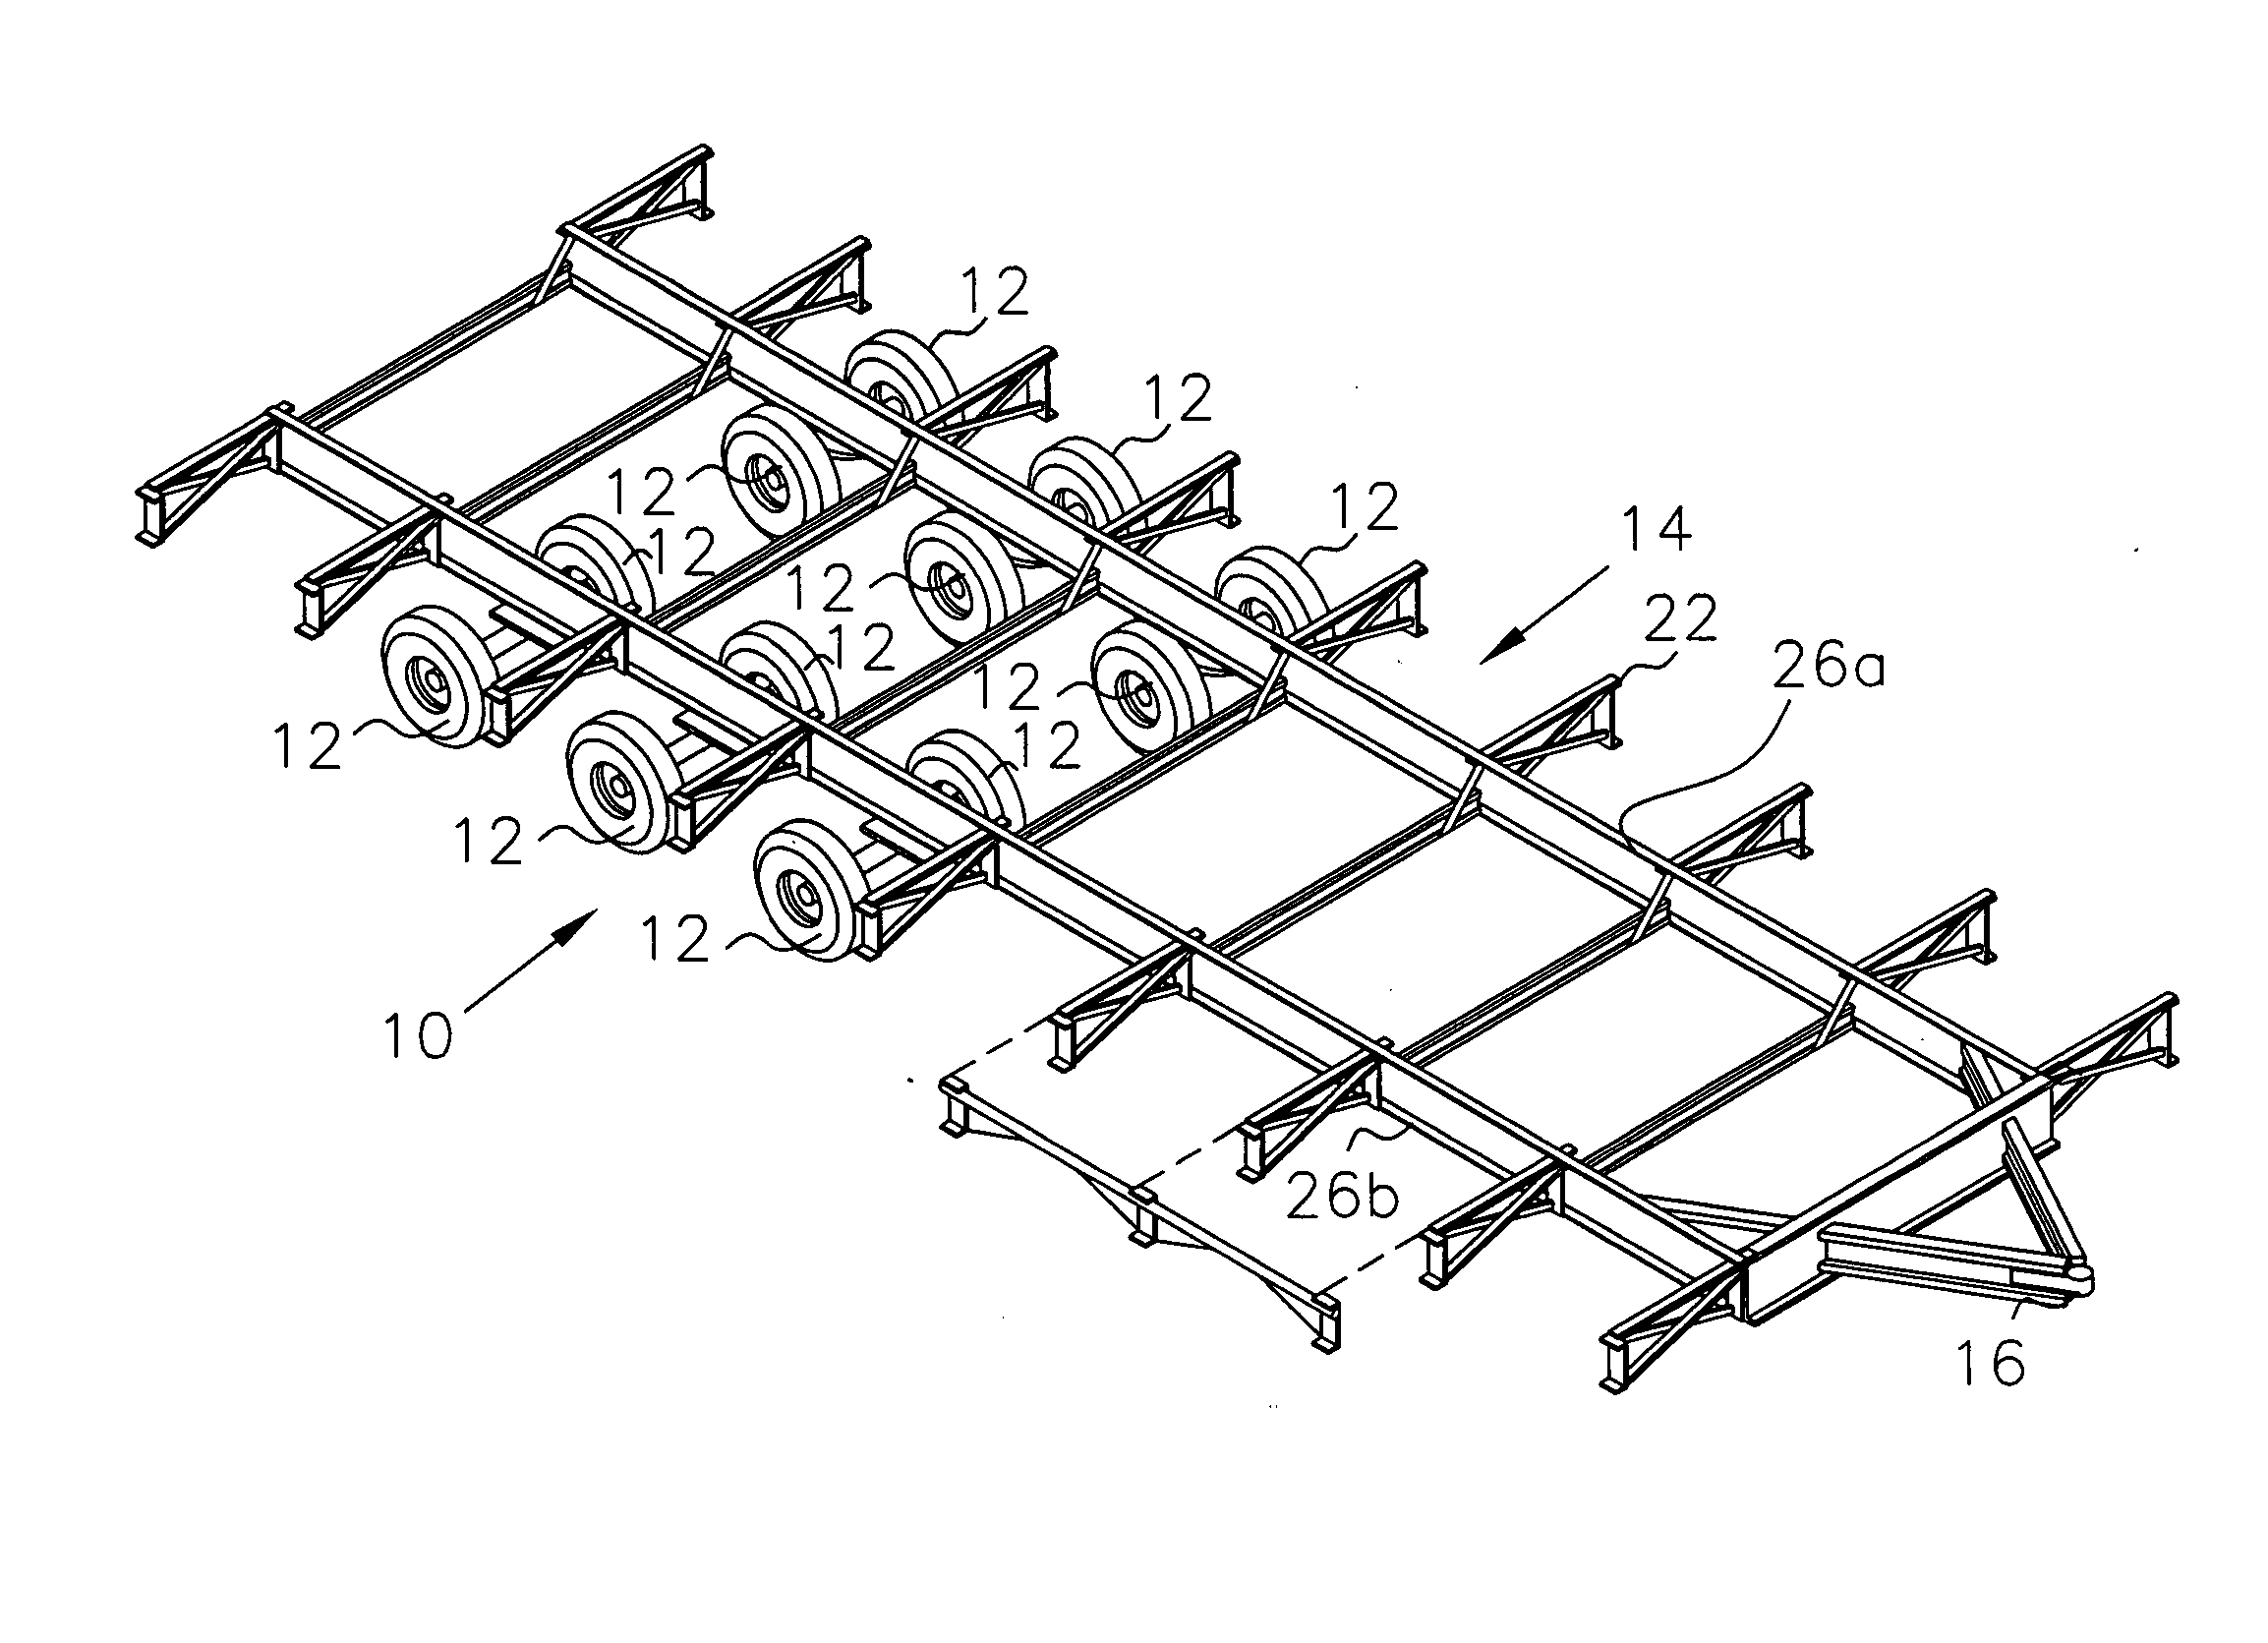 Portable axle and tire assembly